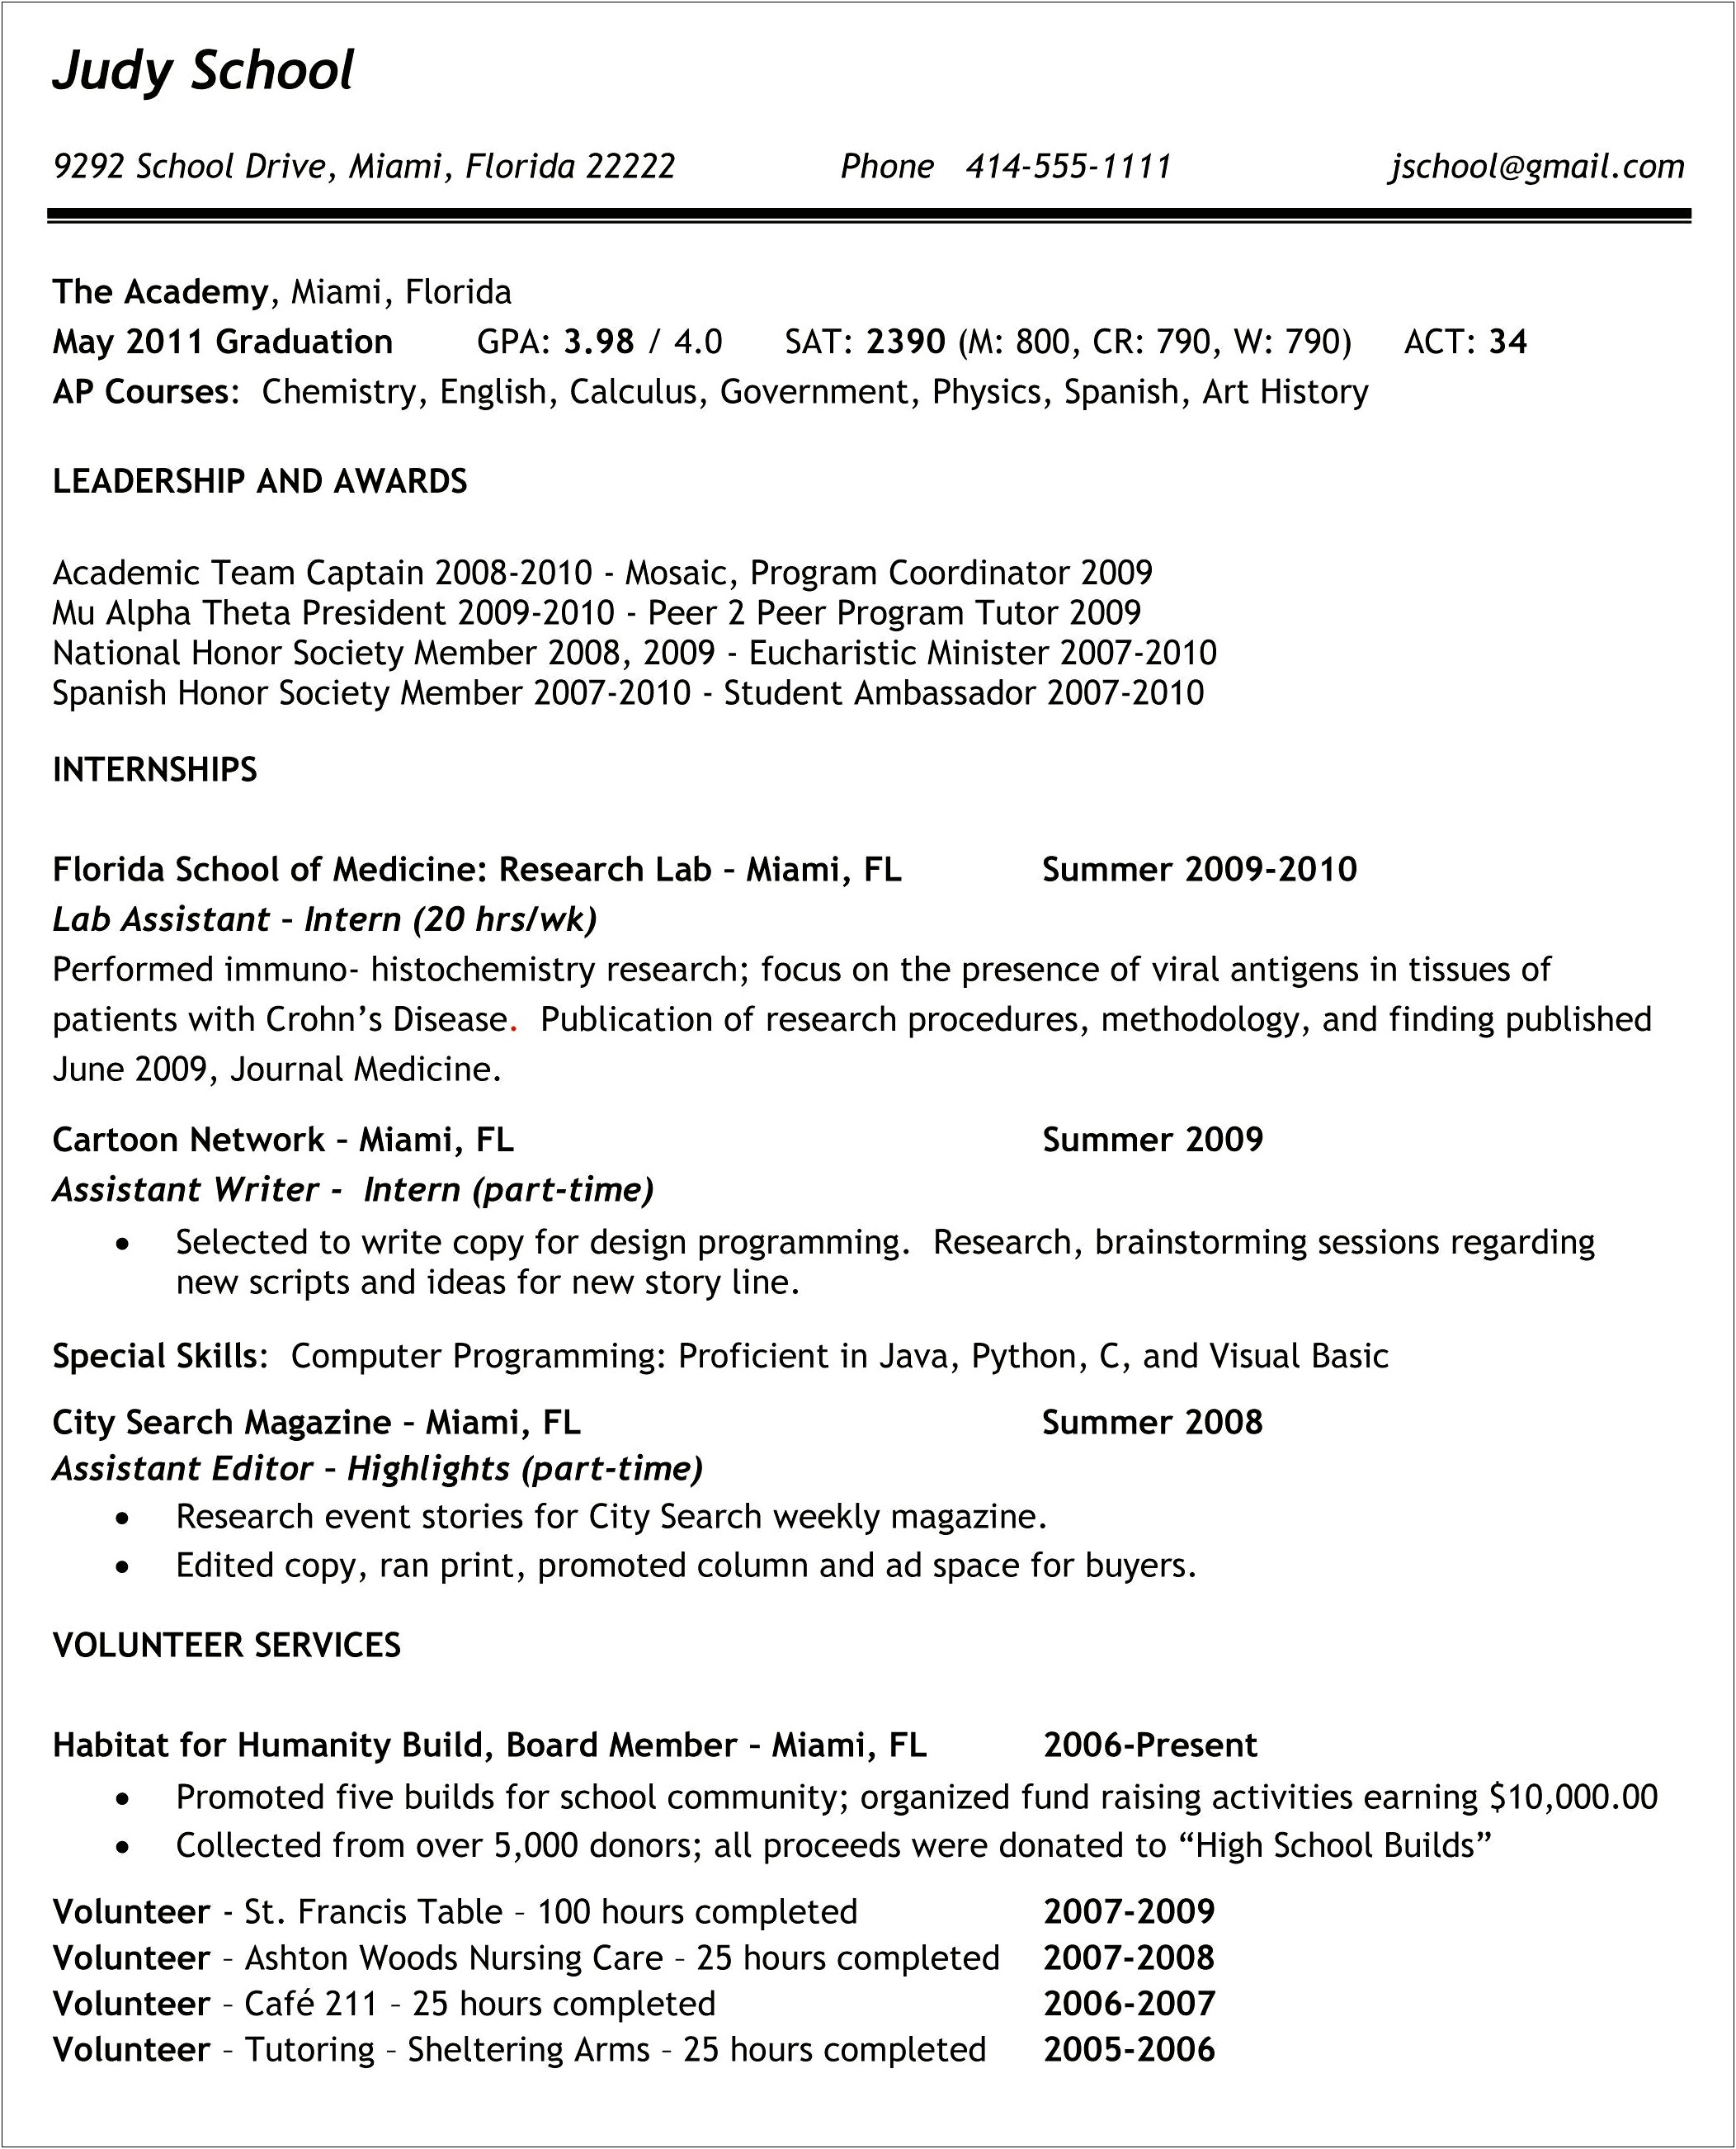 Example Of A Student Resume For College Application